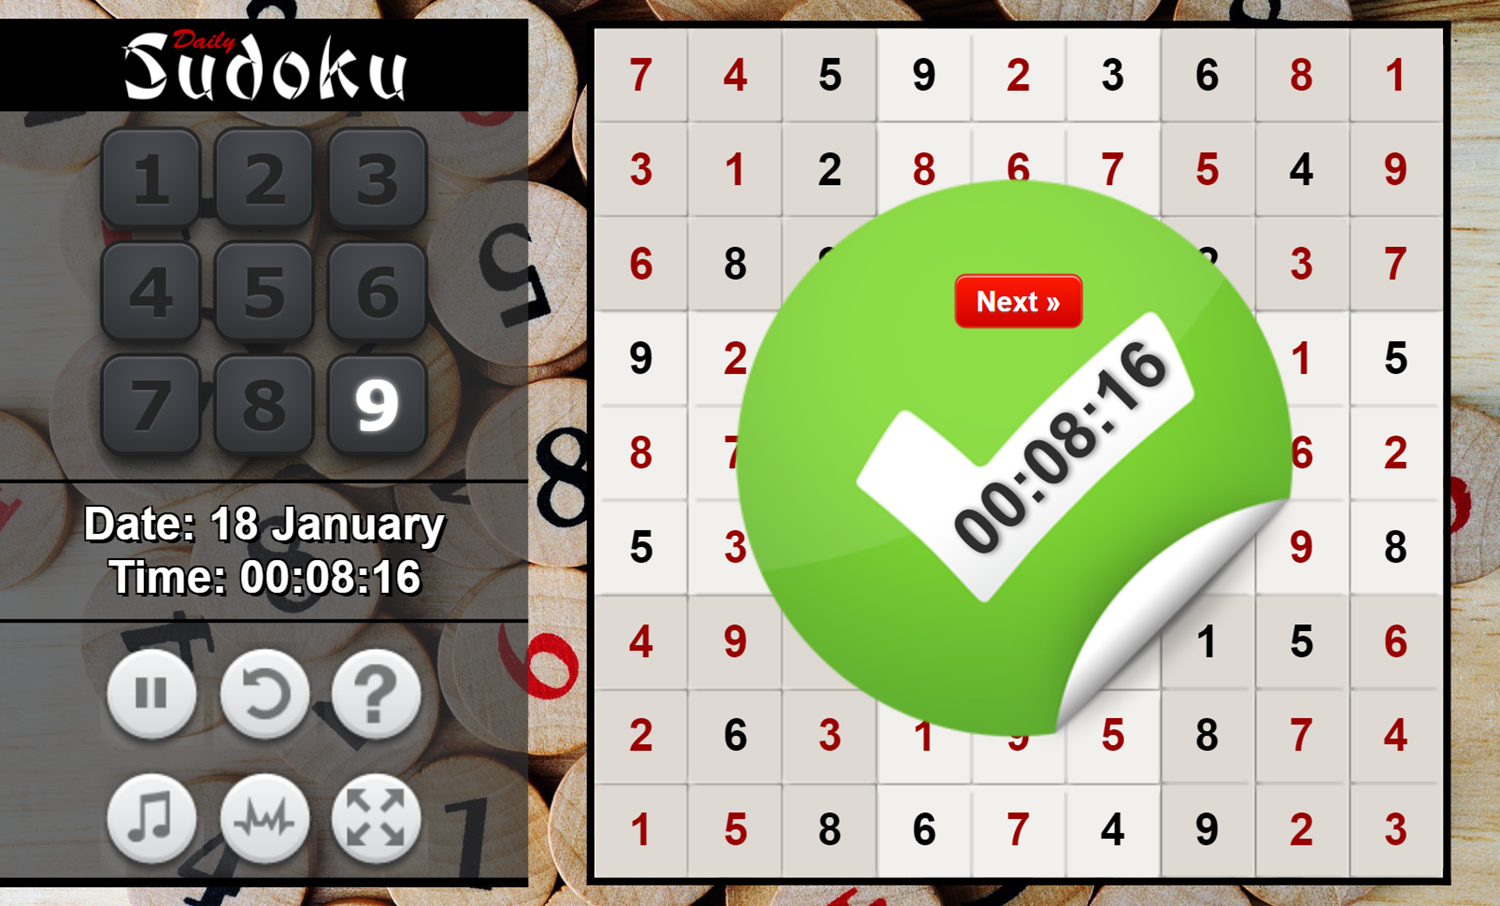 Daily Sudoku Game Puzzle Complete Screenshot.